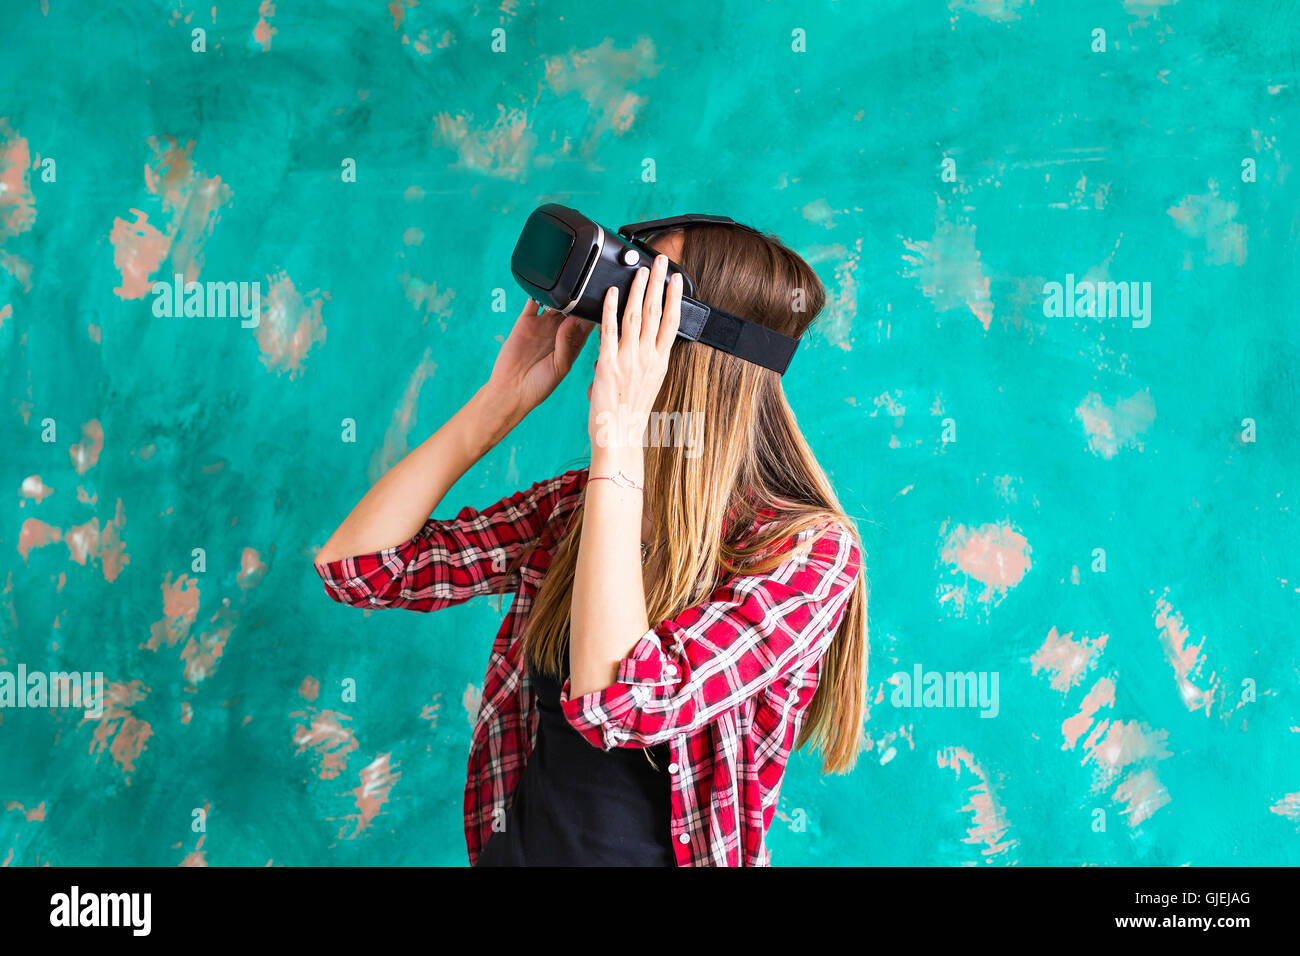 technology, virtual reality, entertainment and people concept - woman with vr headset playing game. Stock Photo